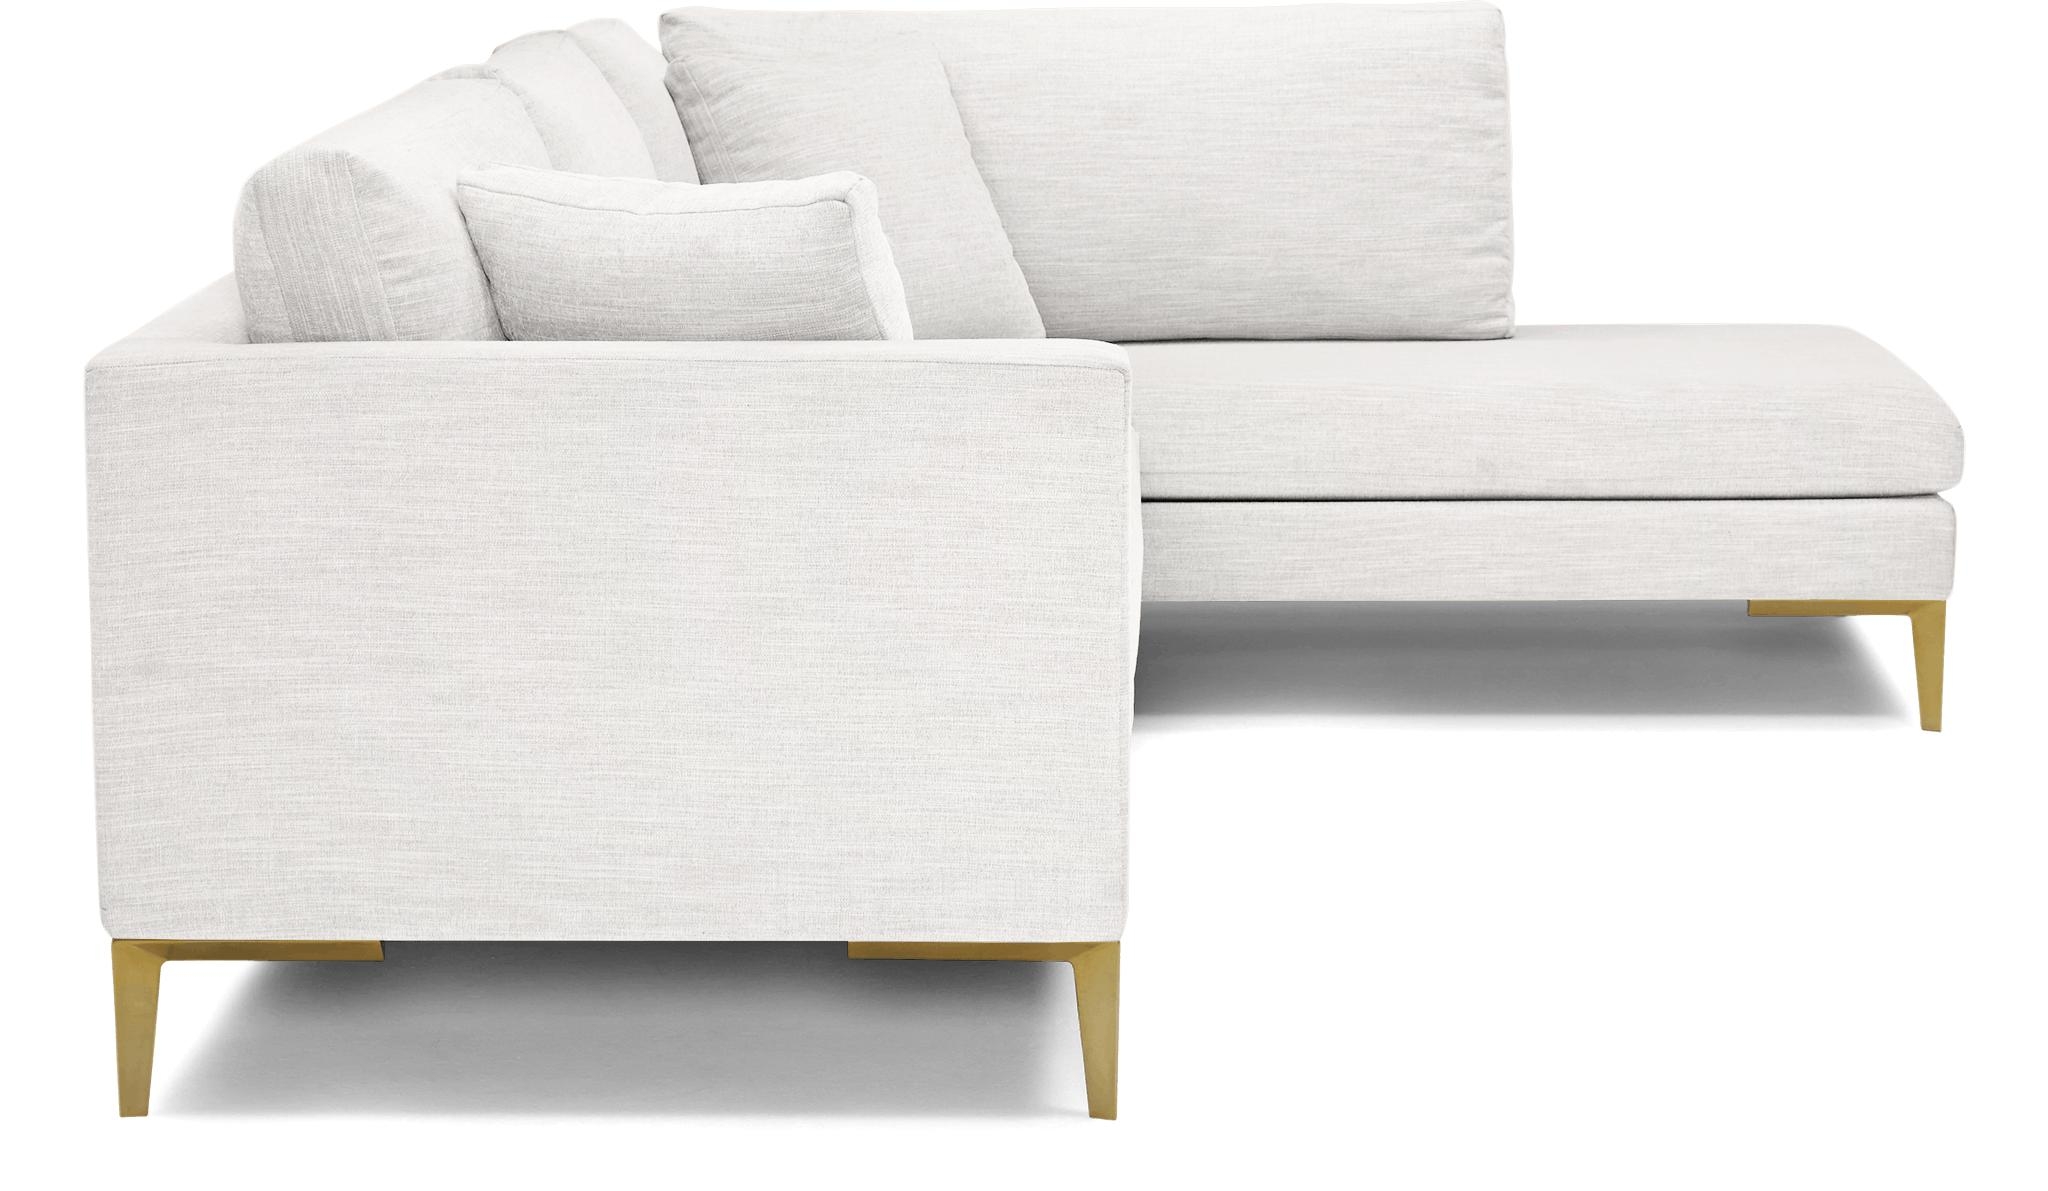 White Ainsley Mid Century Modern Sectional with Bumper - Tussah Blizzard - Left - Image 2